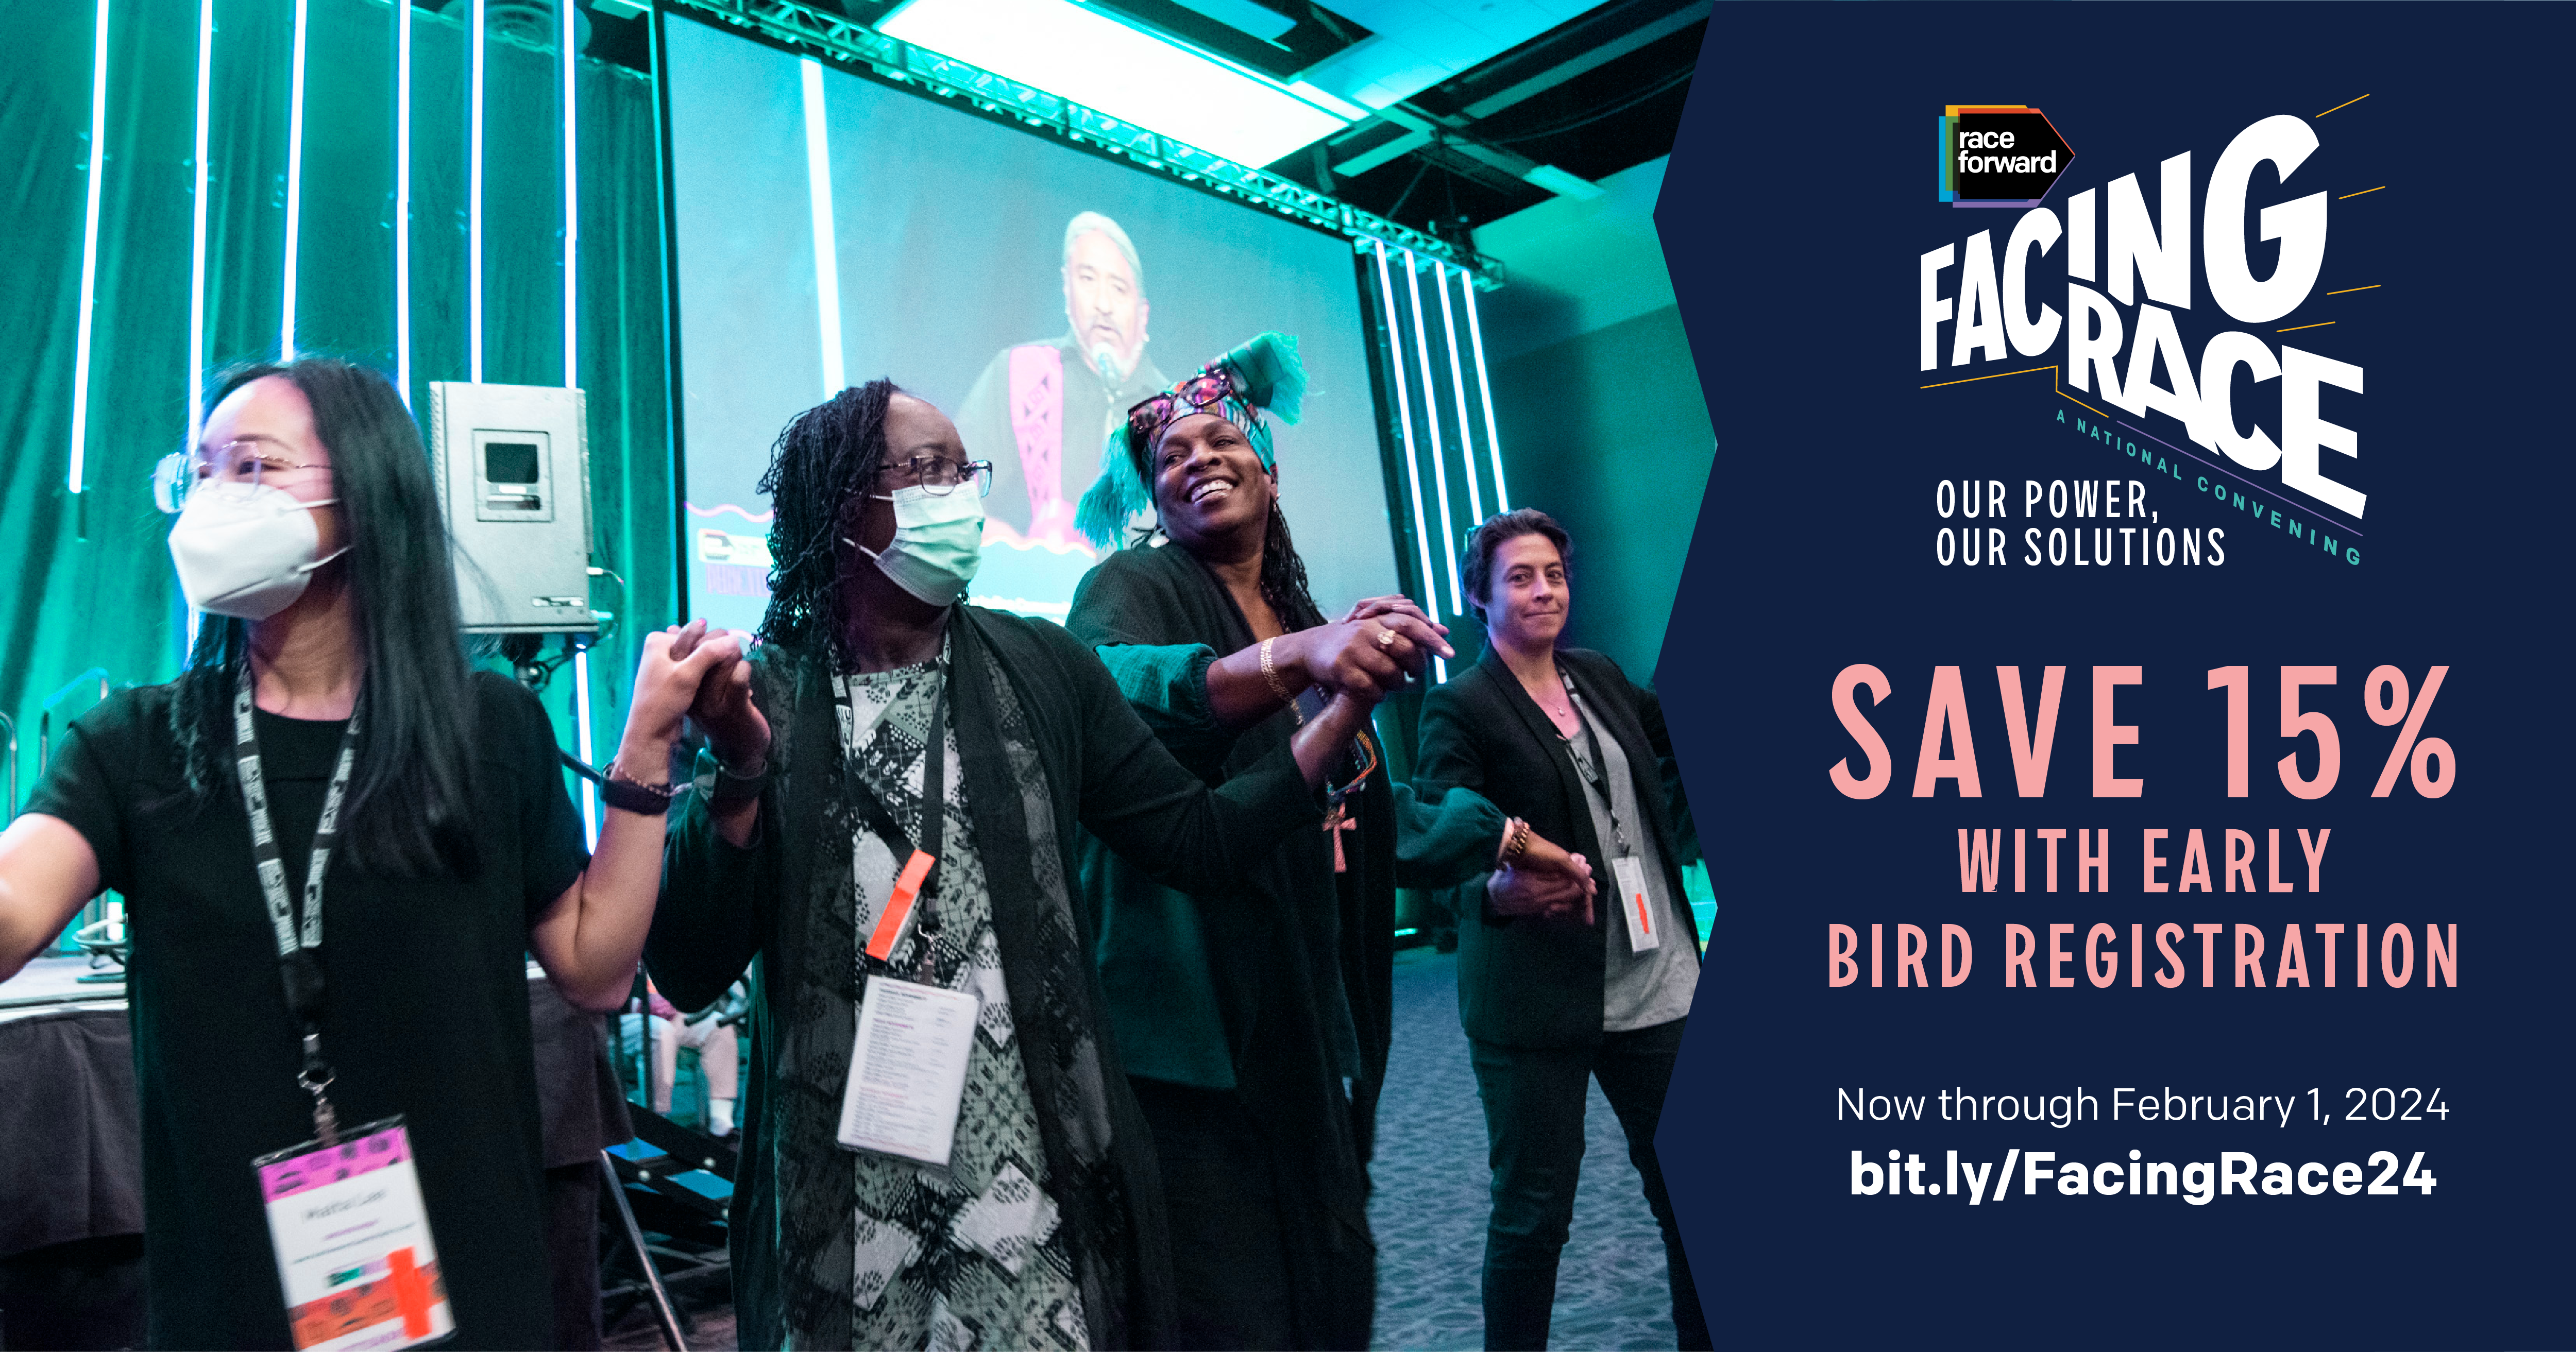 Facing Race: Our Power, Our Solutions. Save 15% with Early Bird Registration now through February 1, 2024 at bit.ly/FacingRace24.